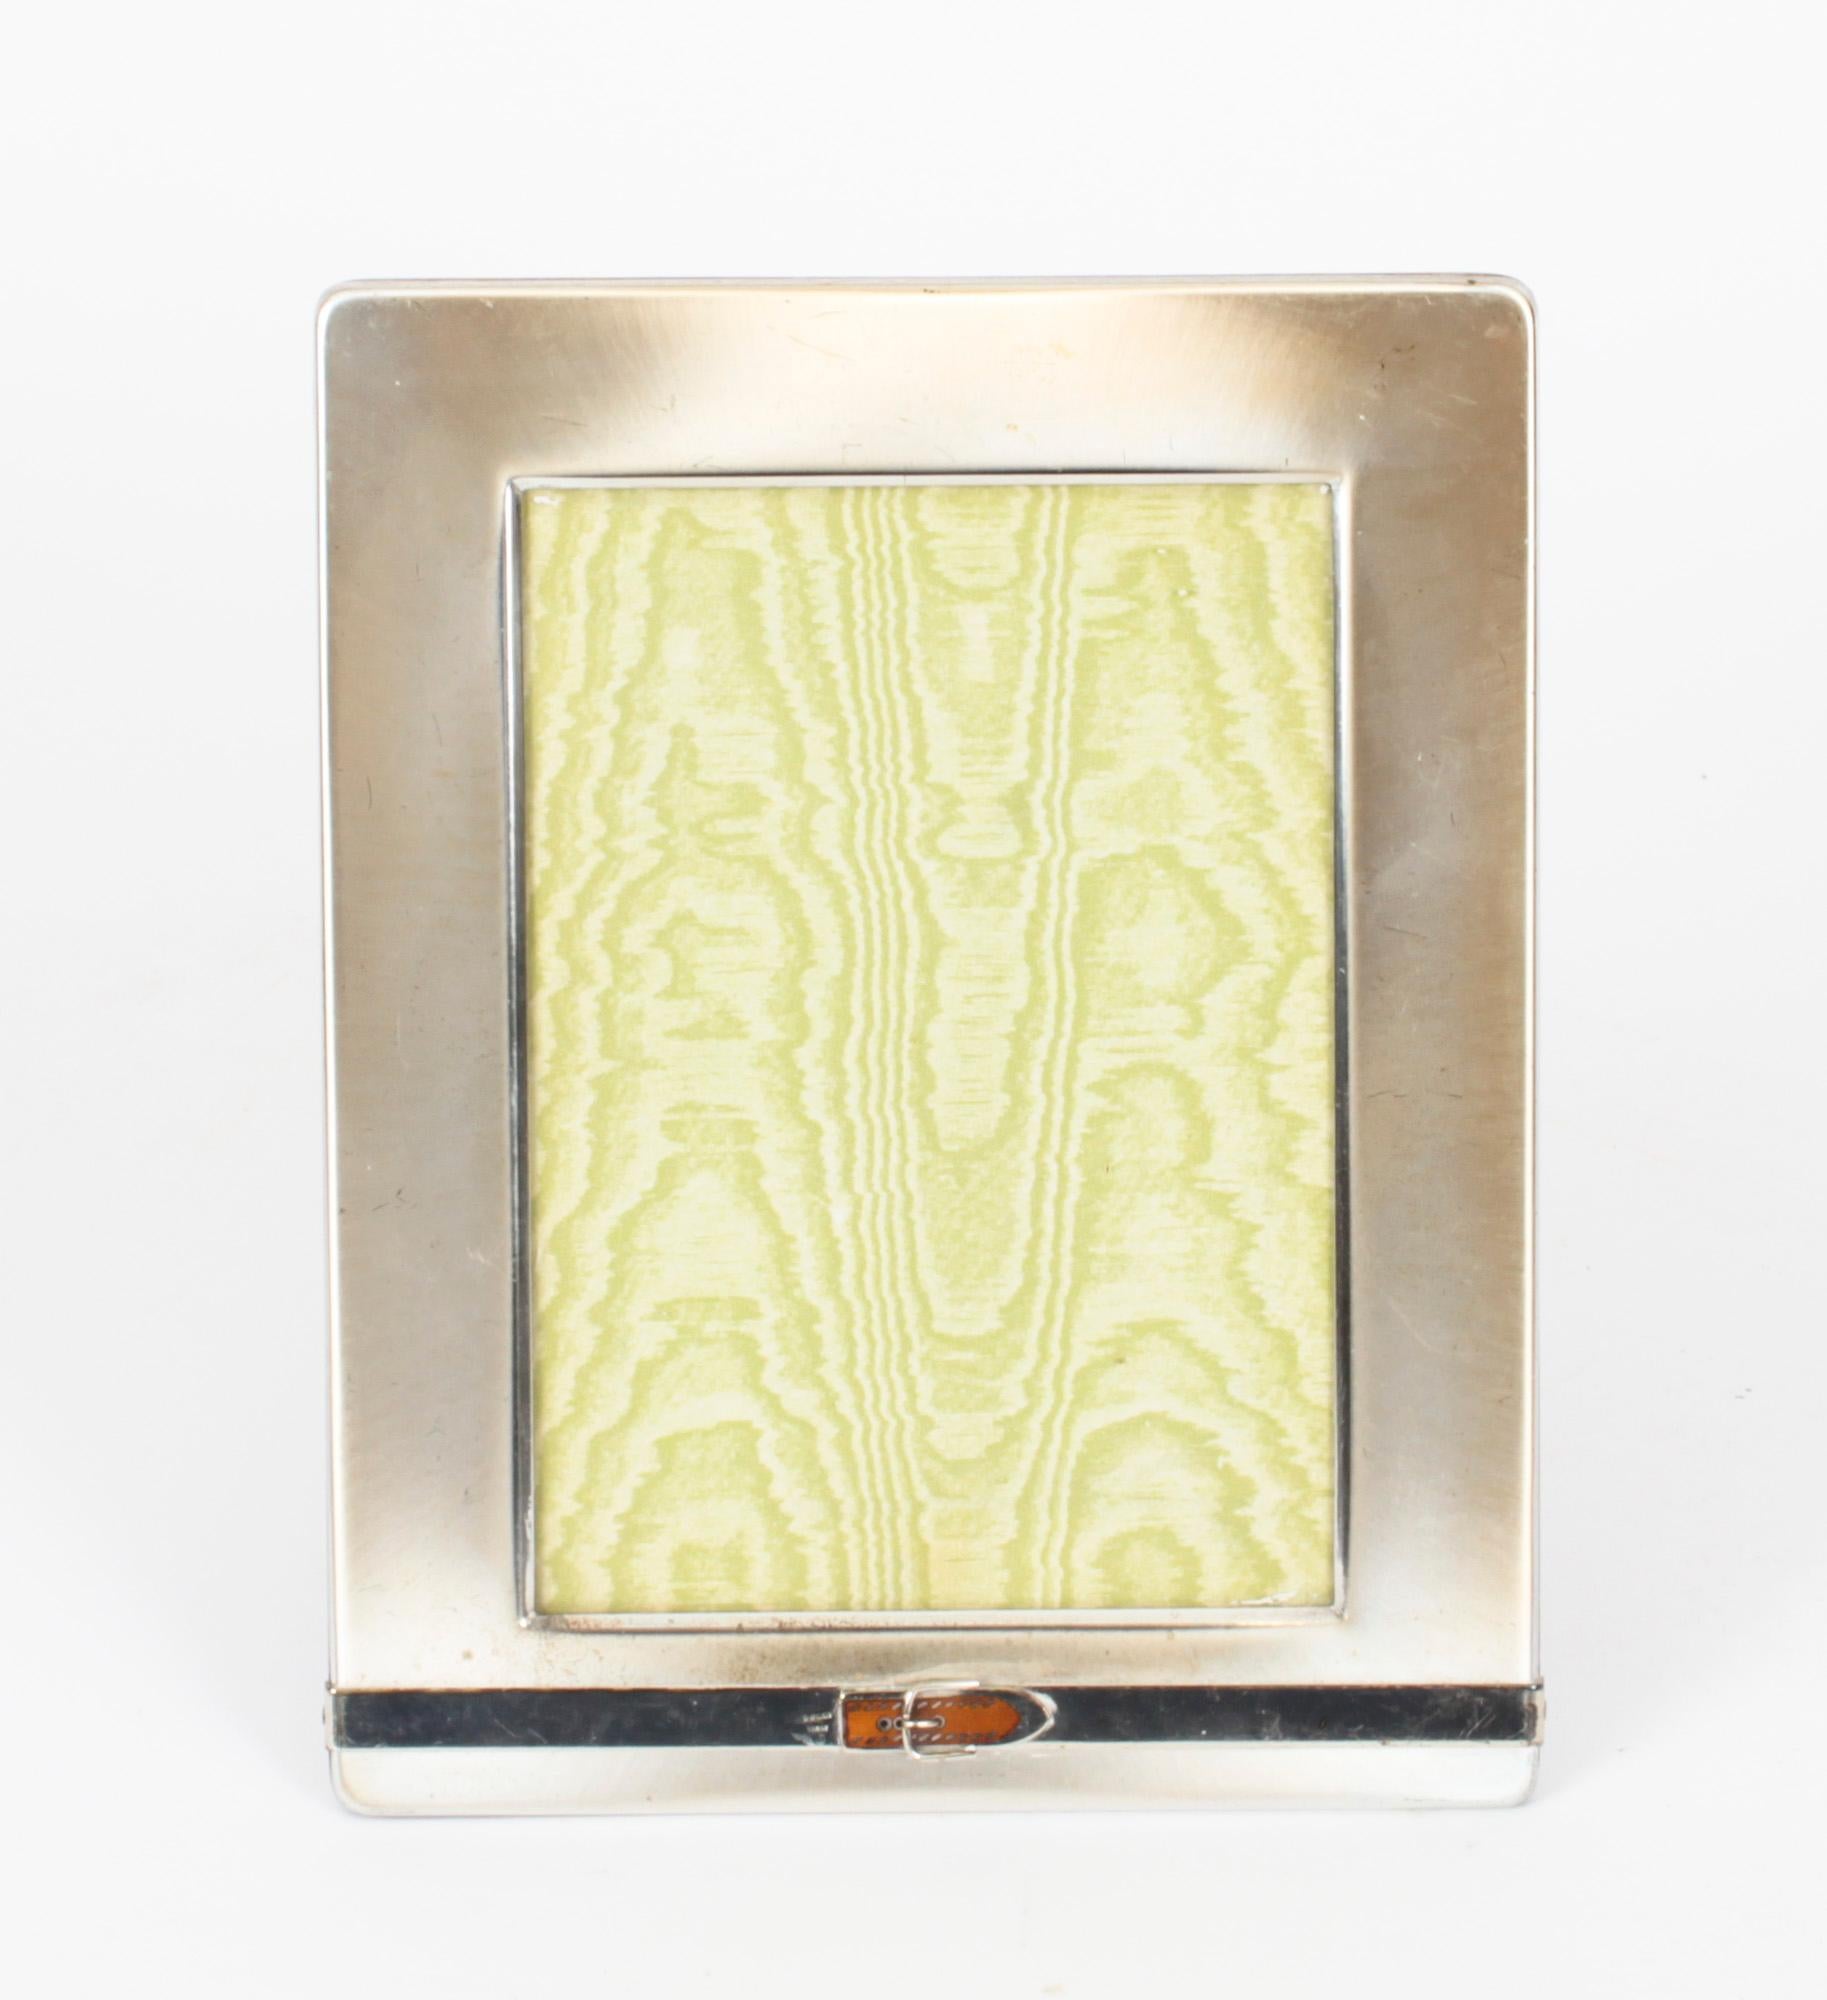 A truly superb decorative photo frame by Gucci, Late 20th century in date.

The frame features a decorative belt design to the bottom with silvered metal borders.

It takes a 7x5 inch (18x13cm) photo.
 
An excellent gift idea for many